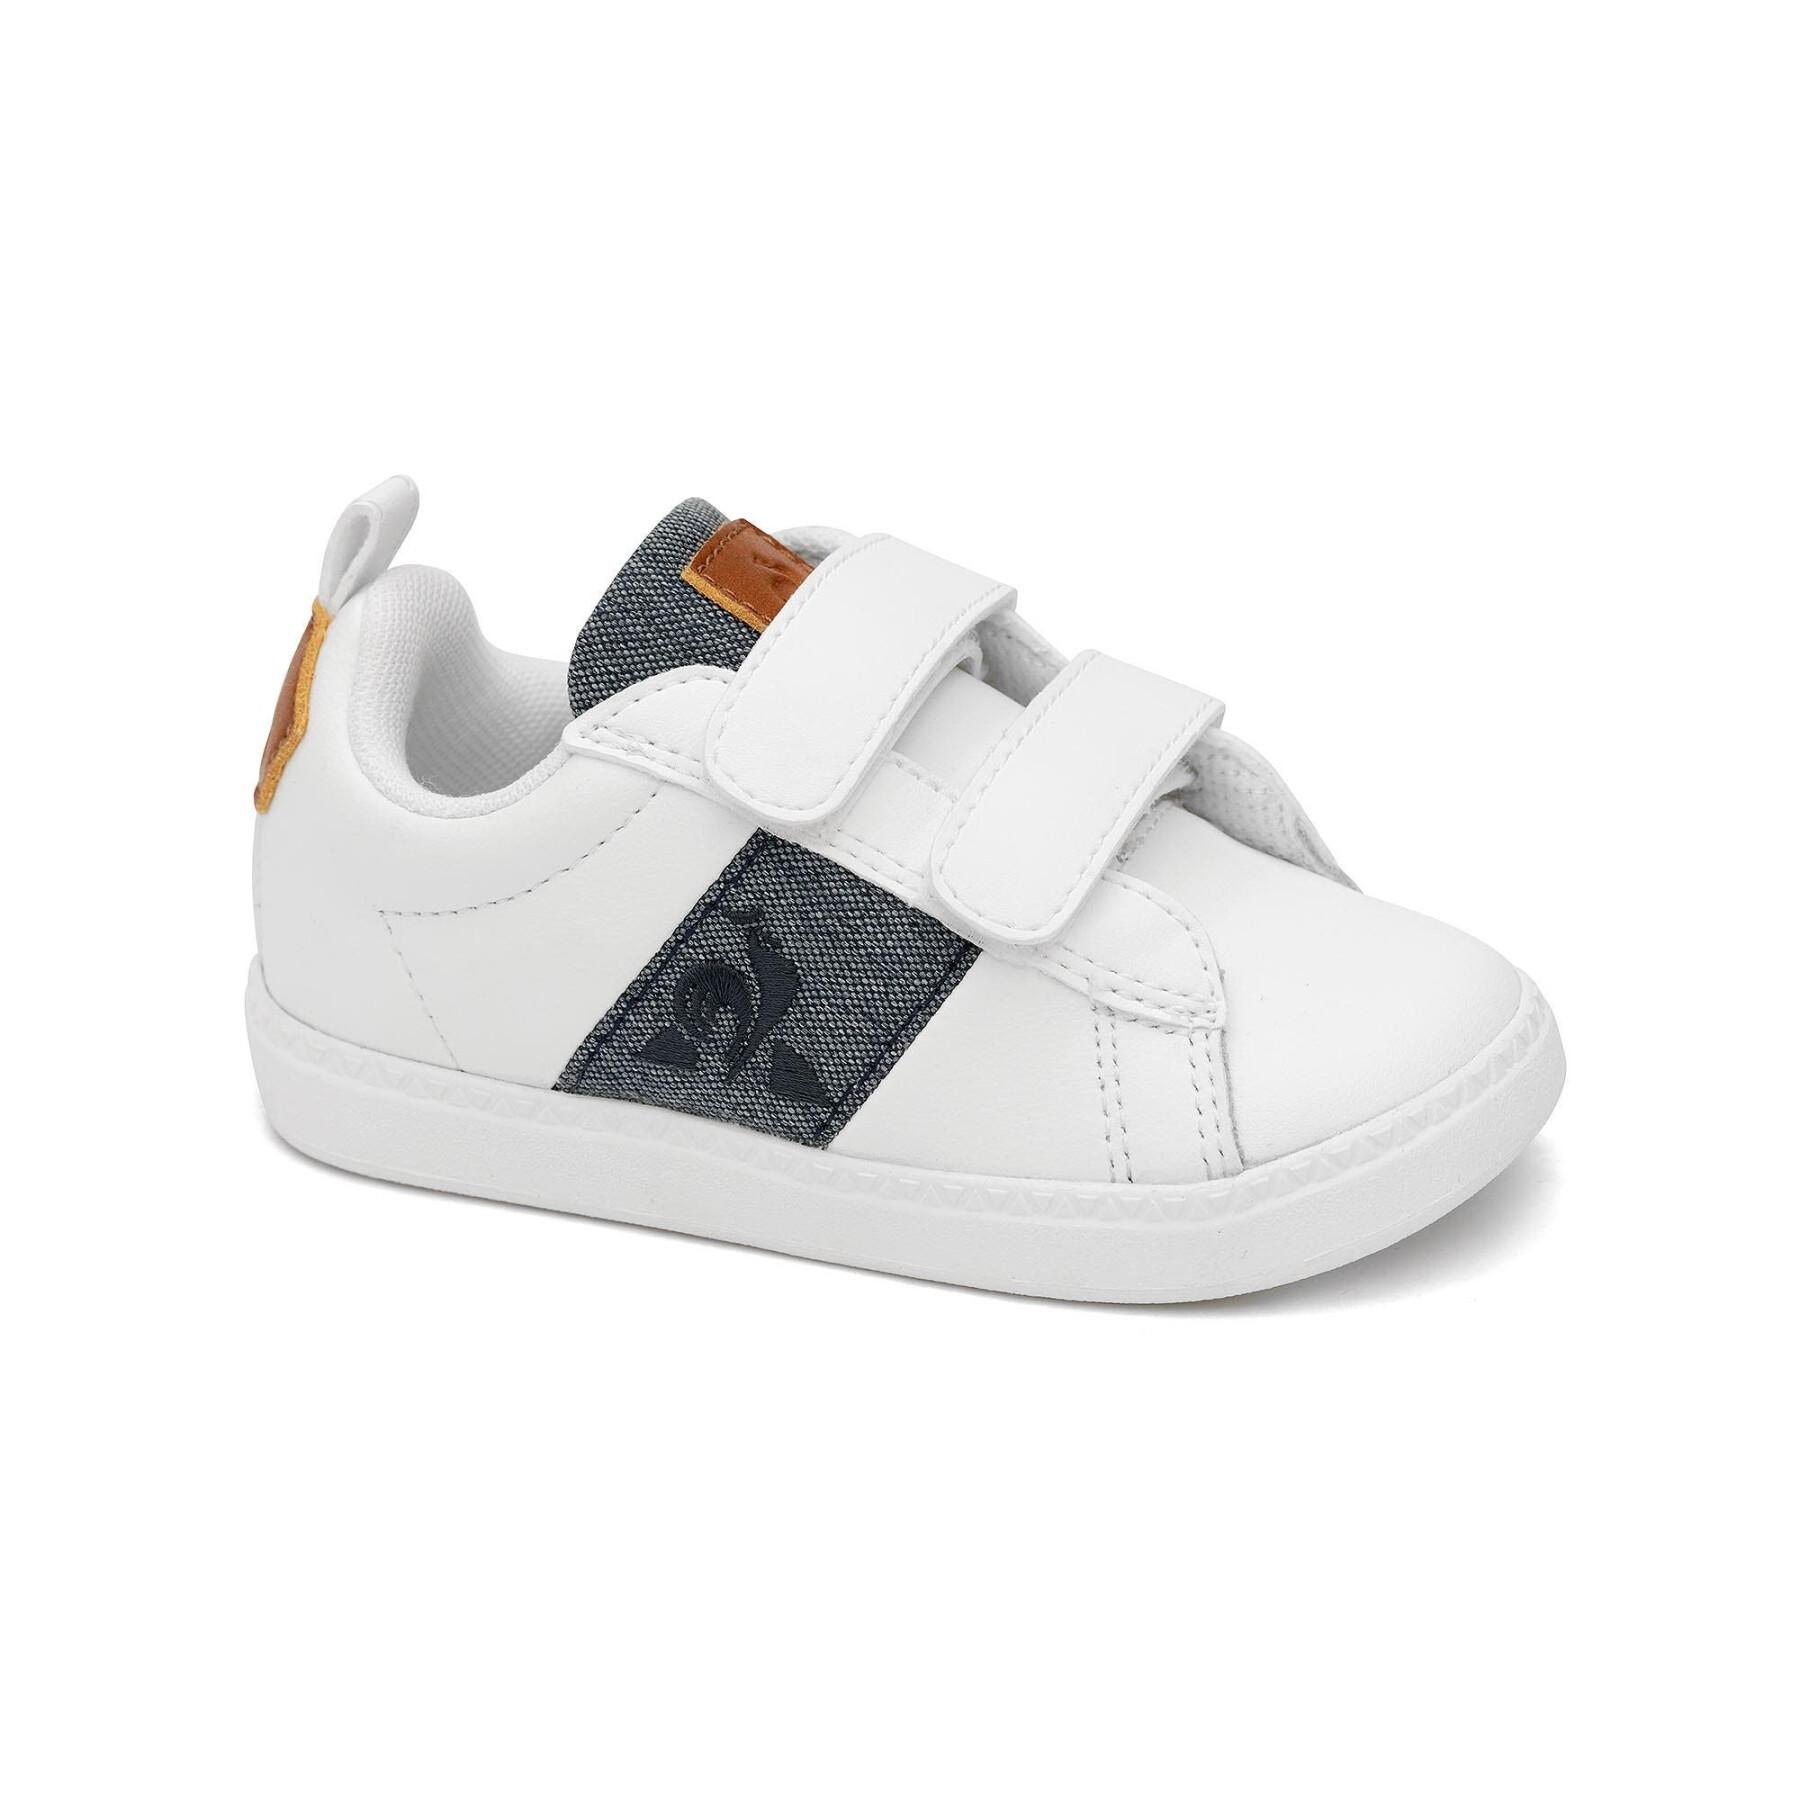 Kindertrainers Le Coq Sportif Courtclassic Inf Workwear